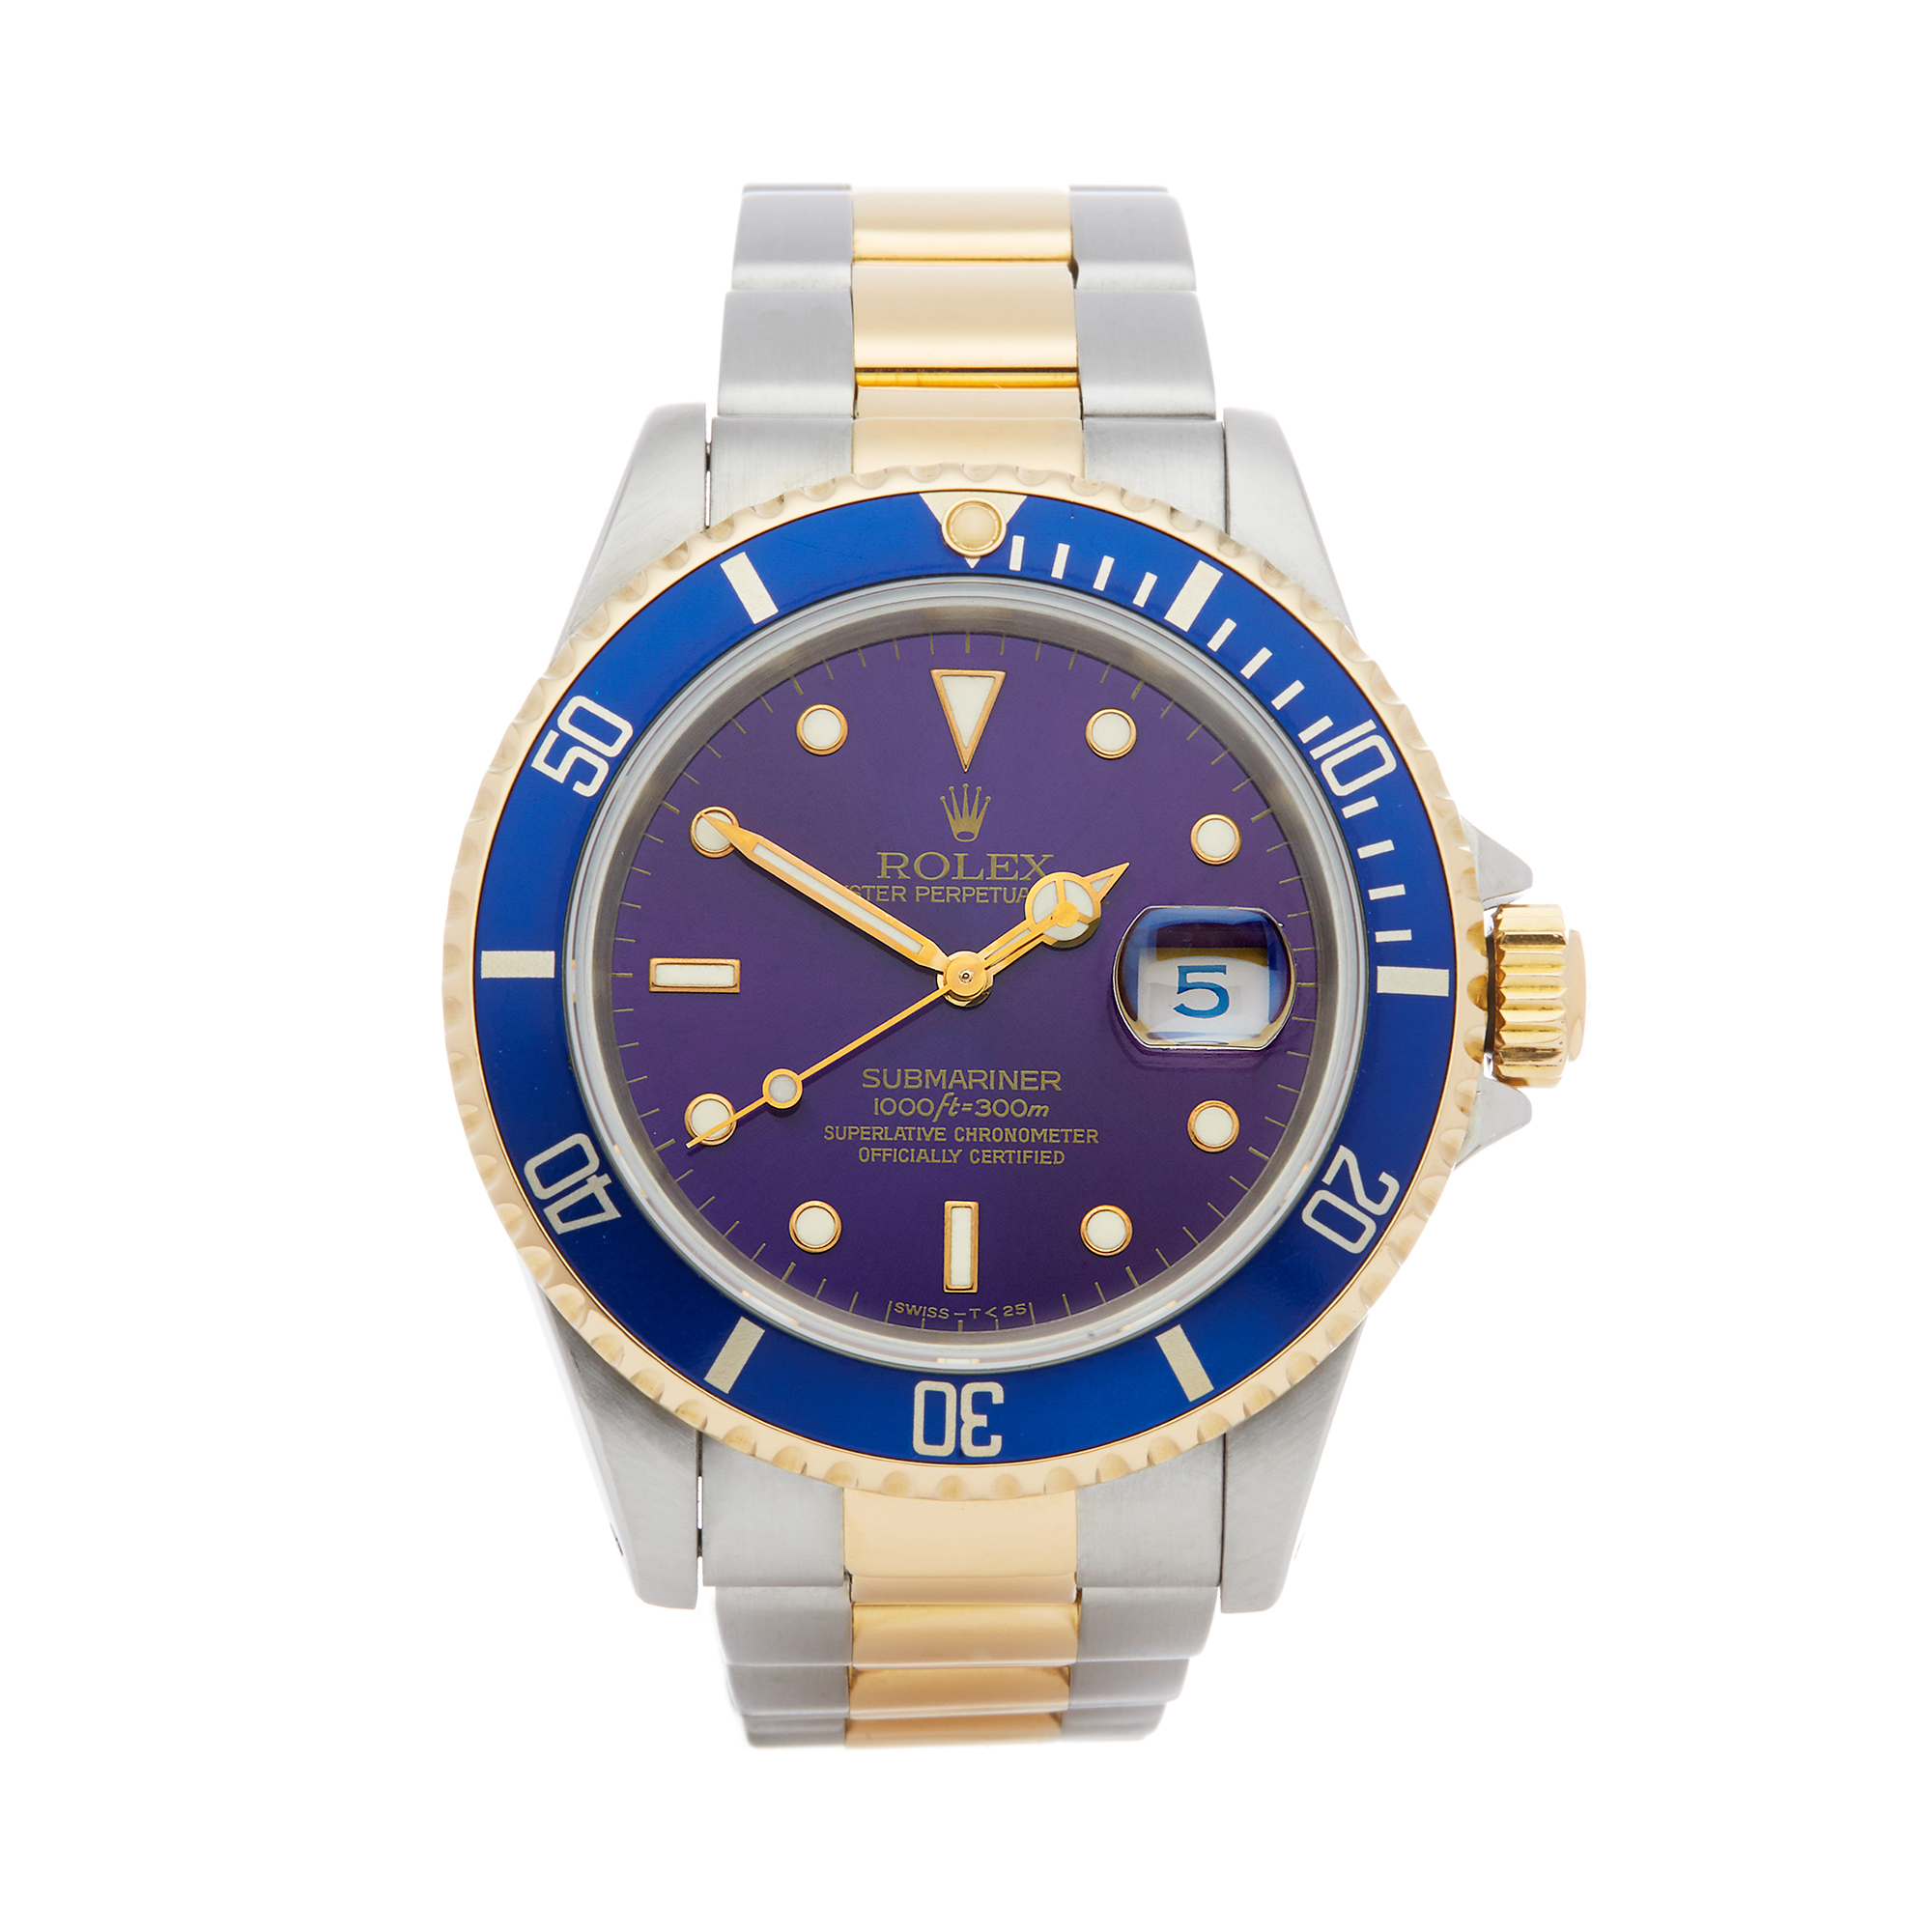 Rolex Submariner Date 16613 Men Stainless Steel & Yellow Gold Watch - Image 8 of 8